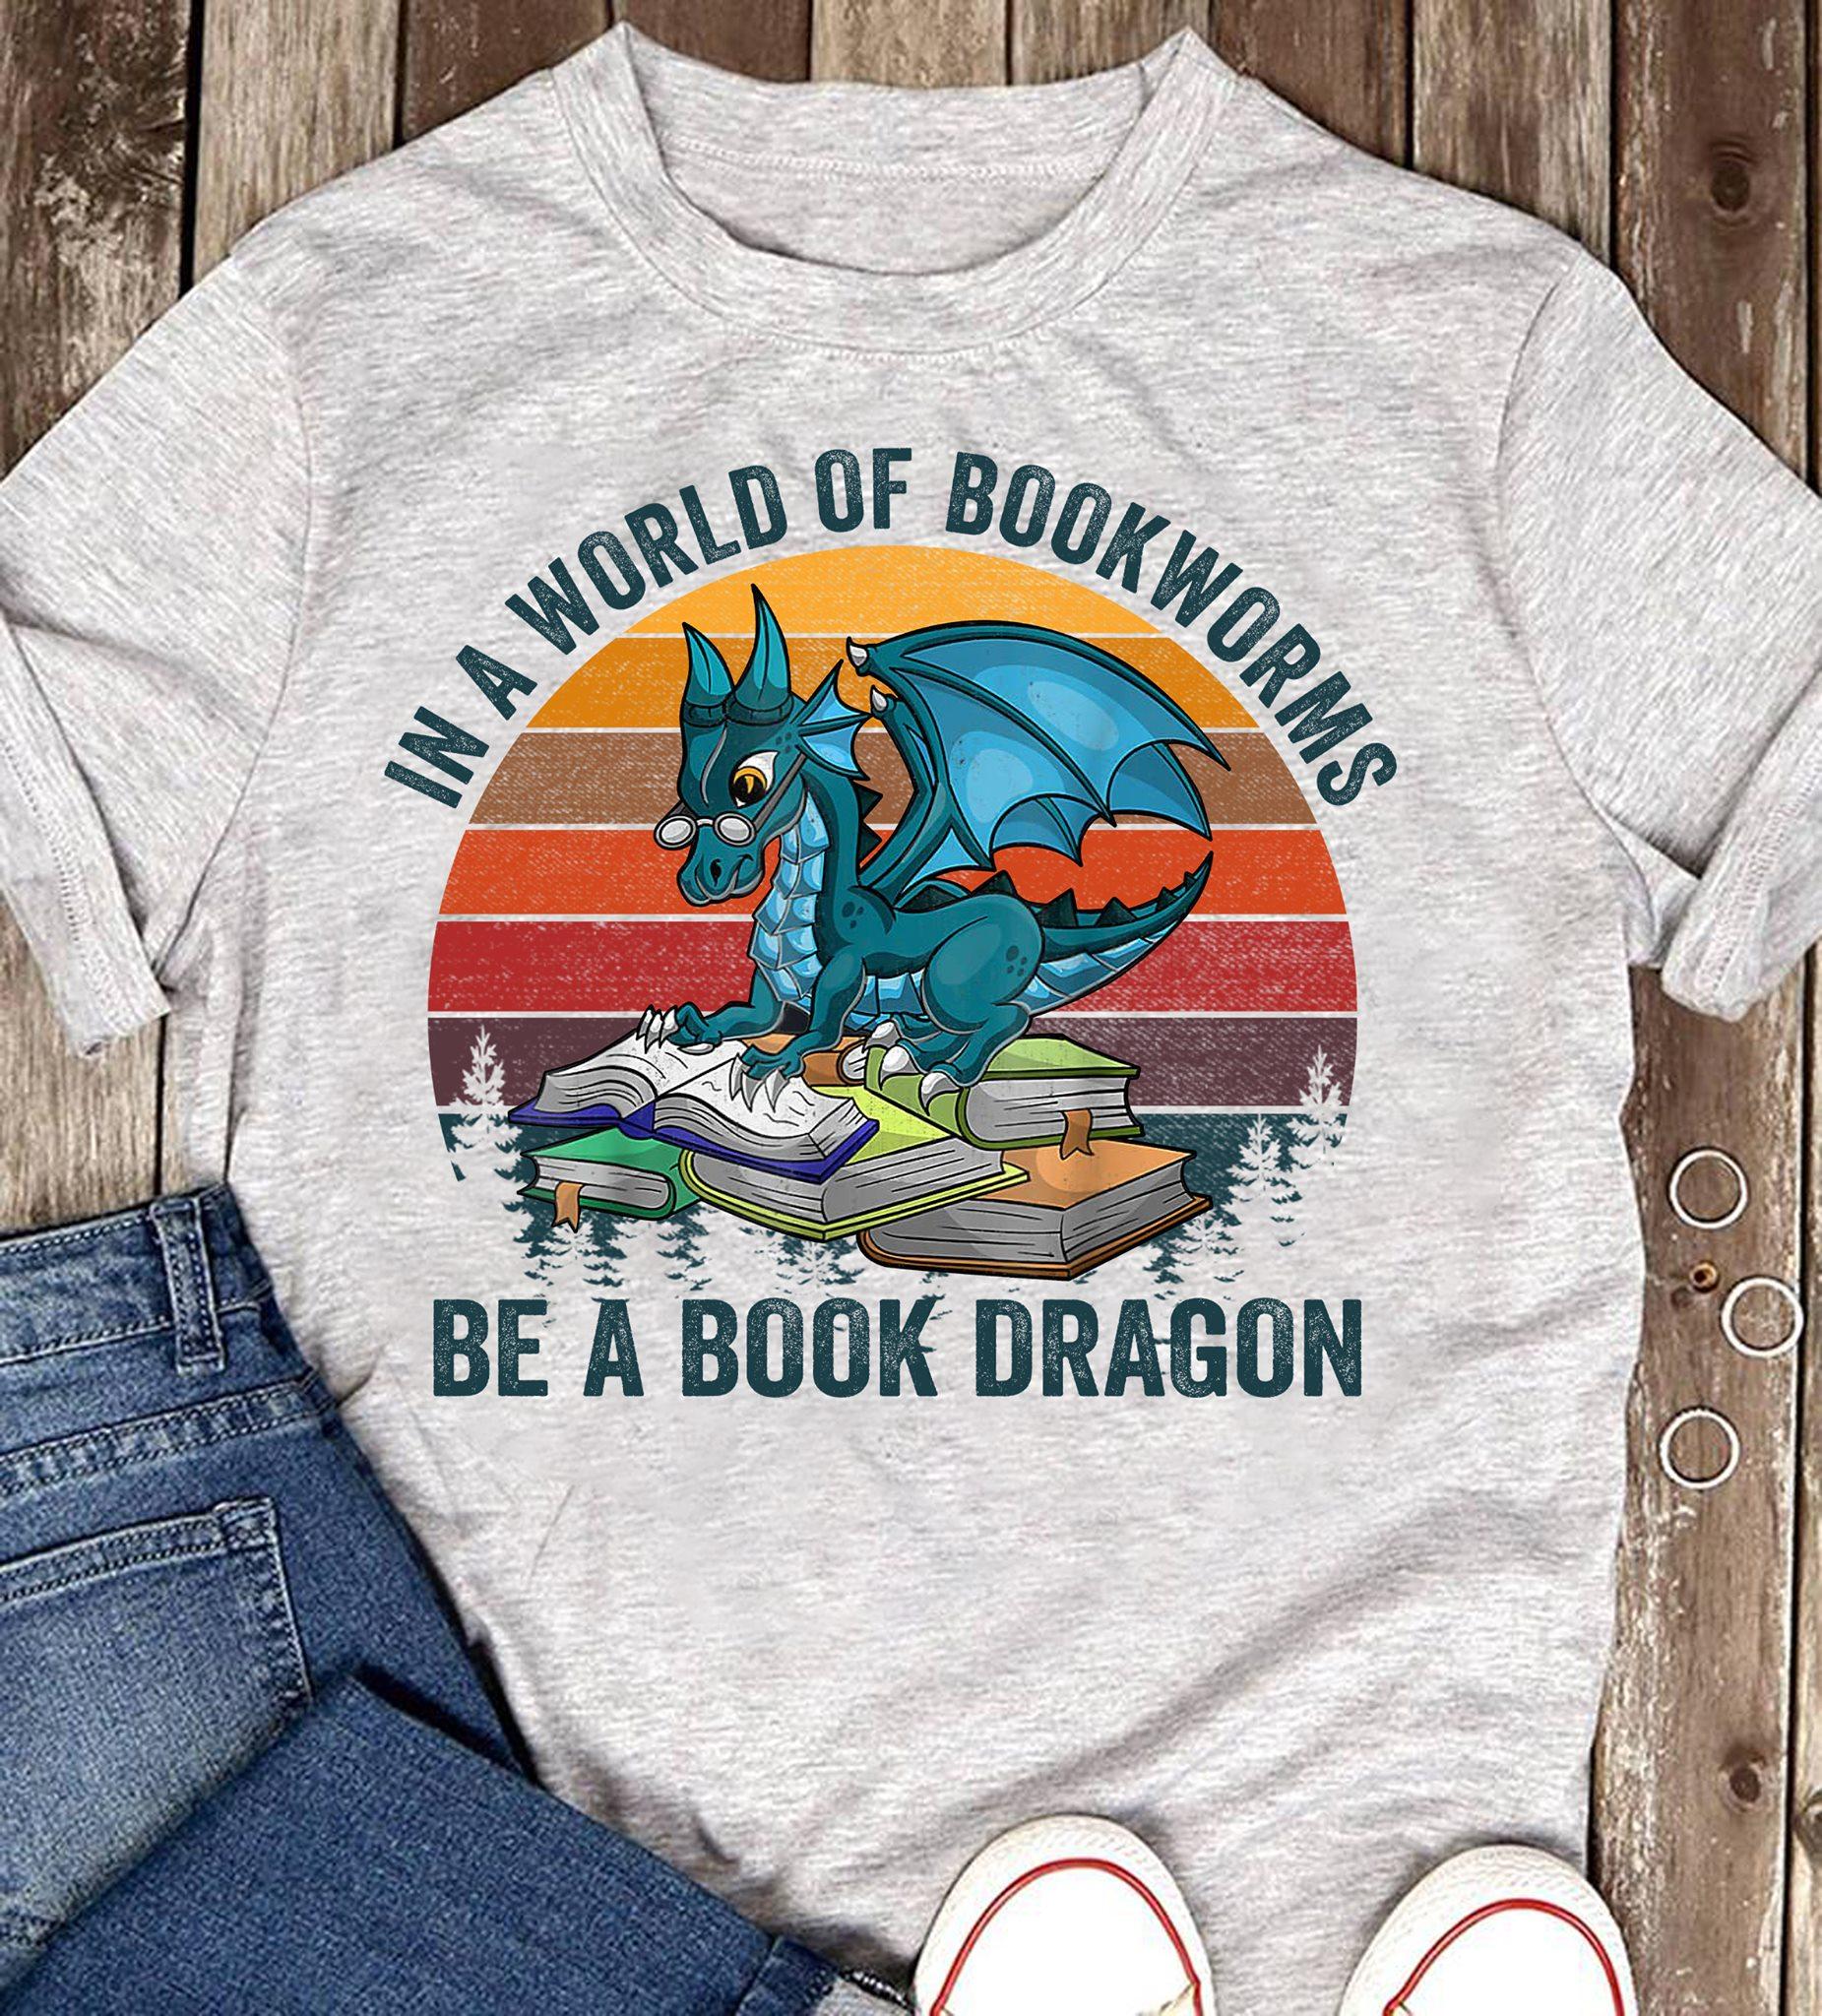 Dragon Read Book - In a world of bookworms be a book dragon